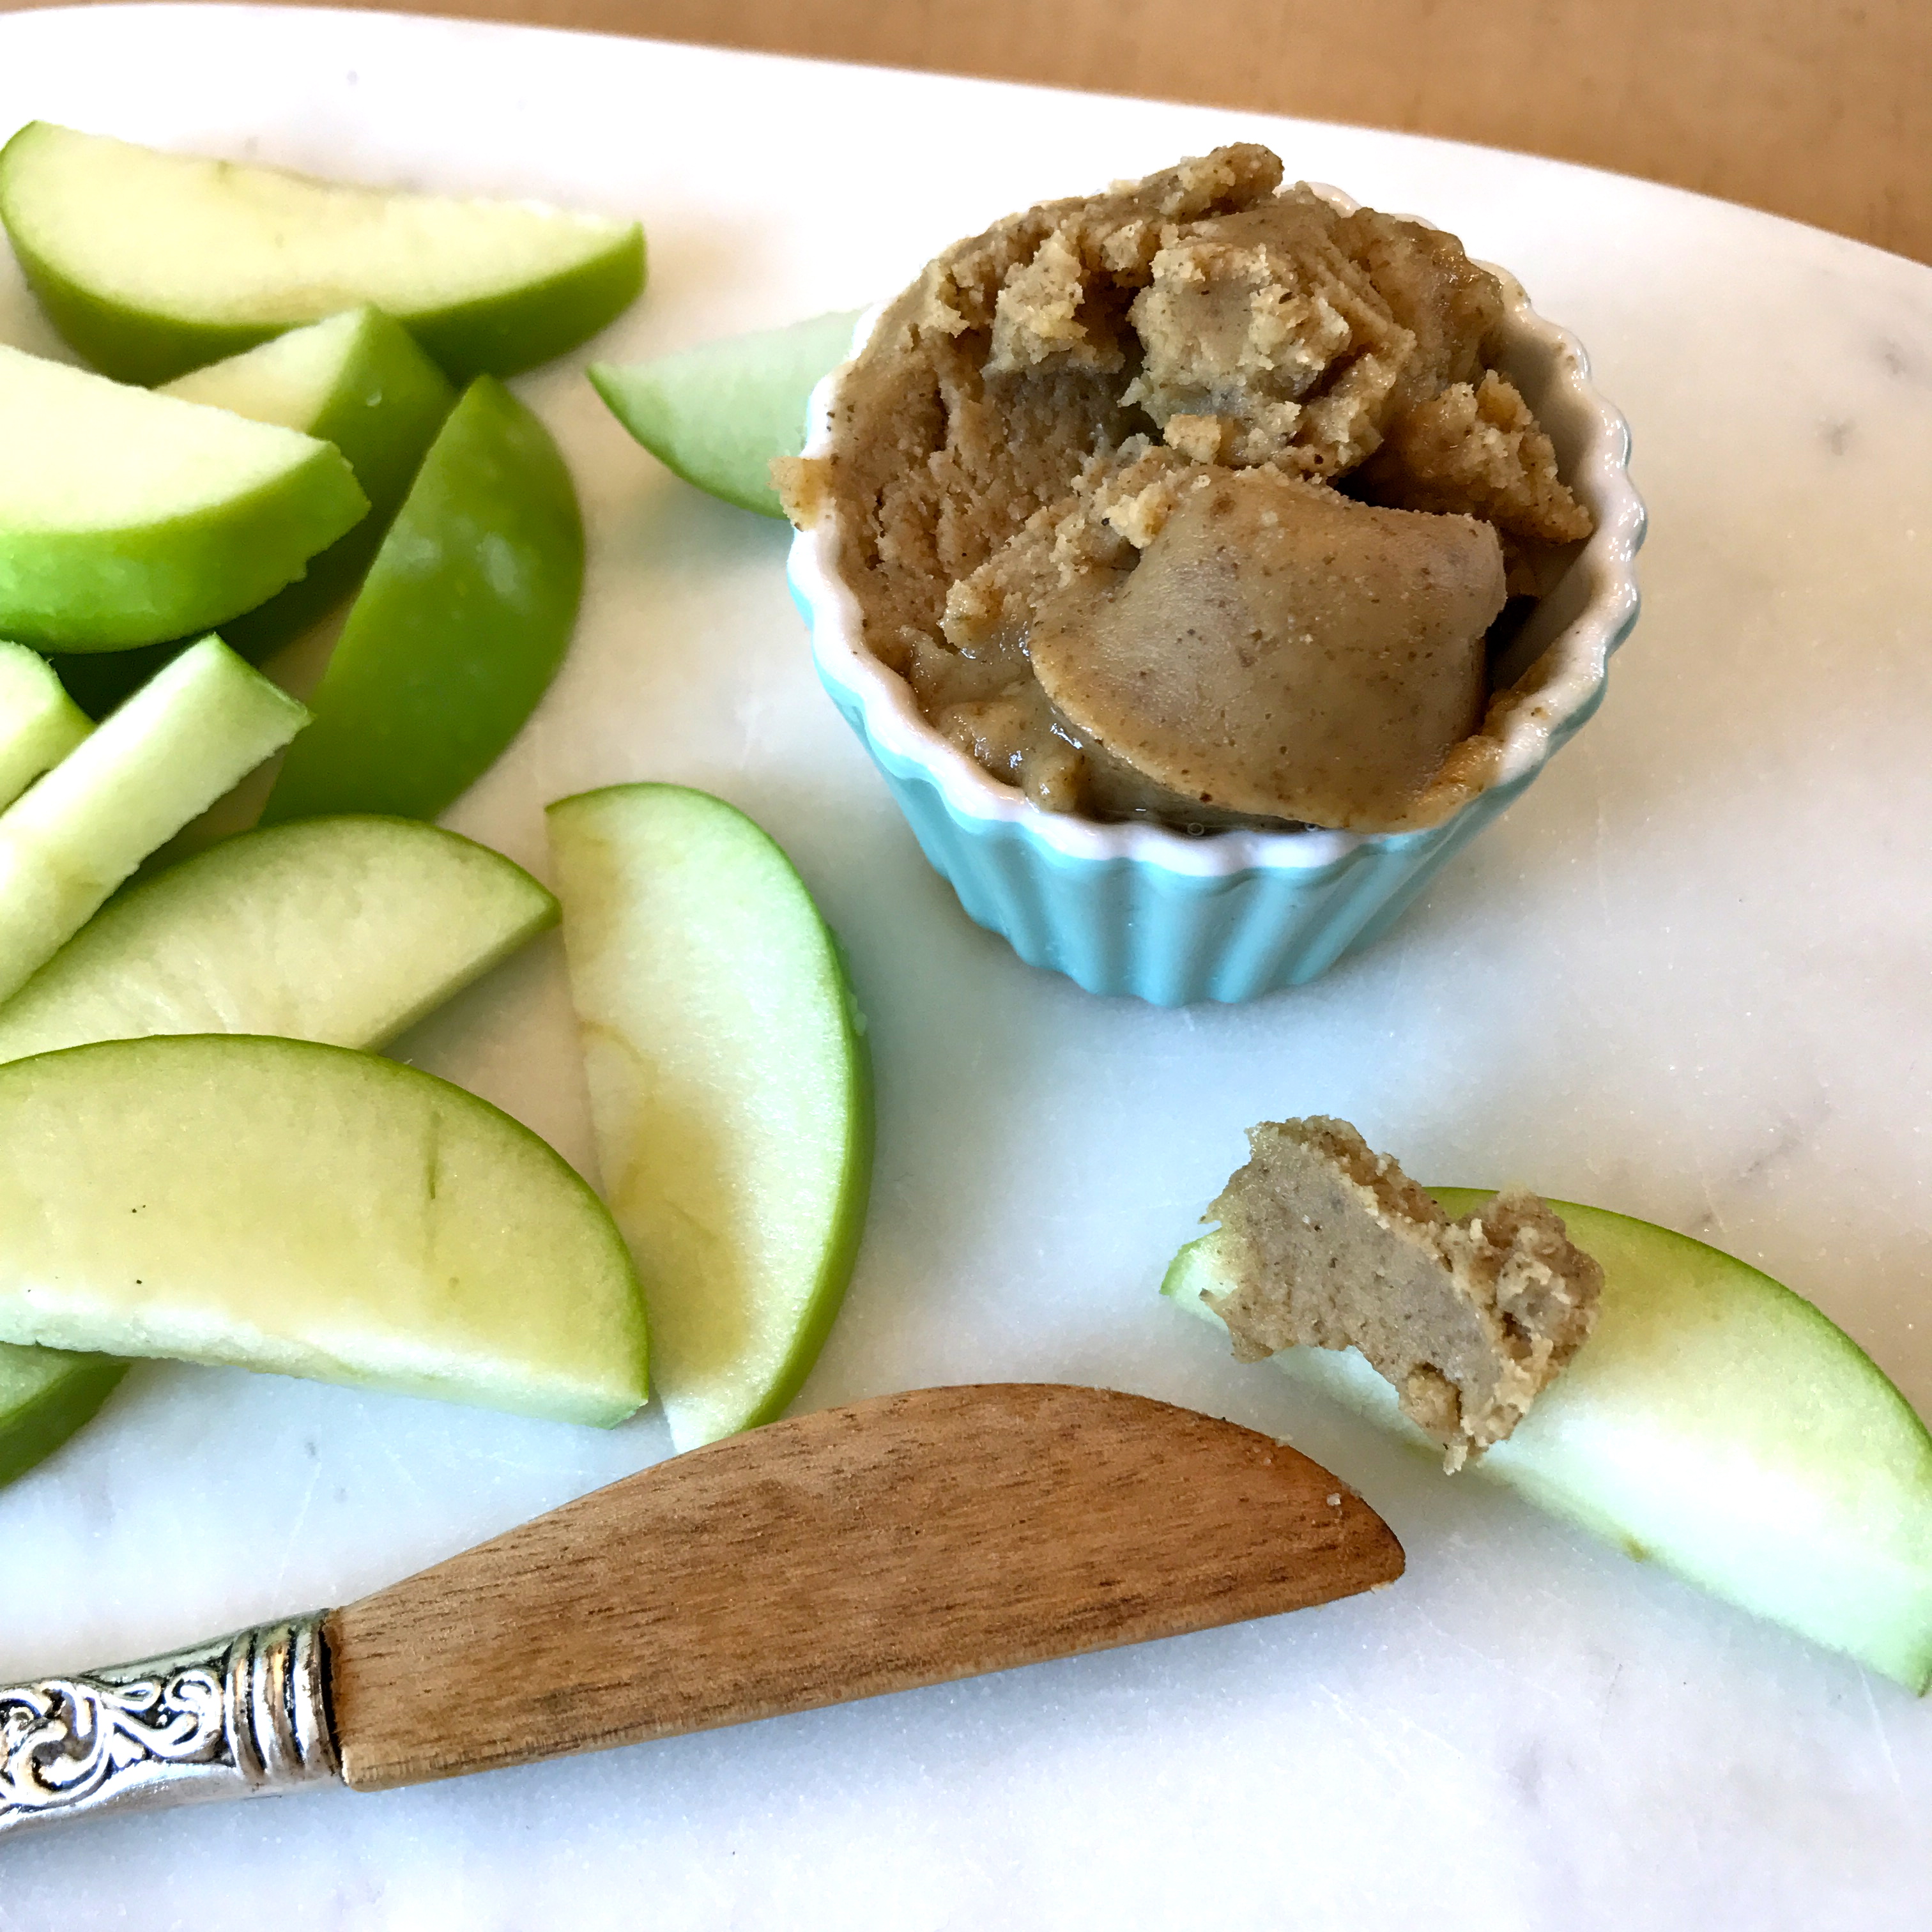 Walnut butter and apple